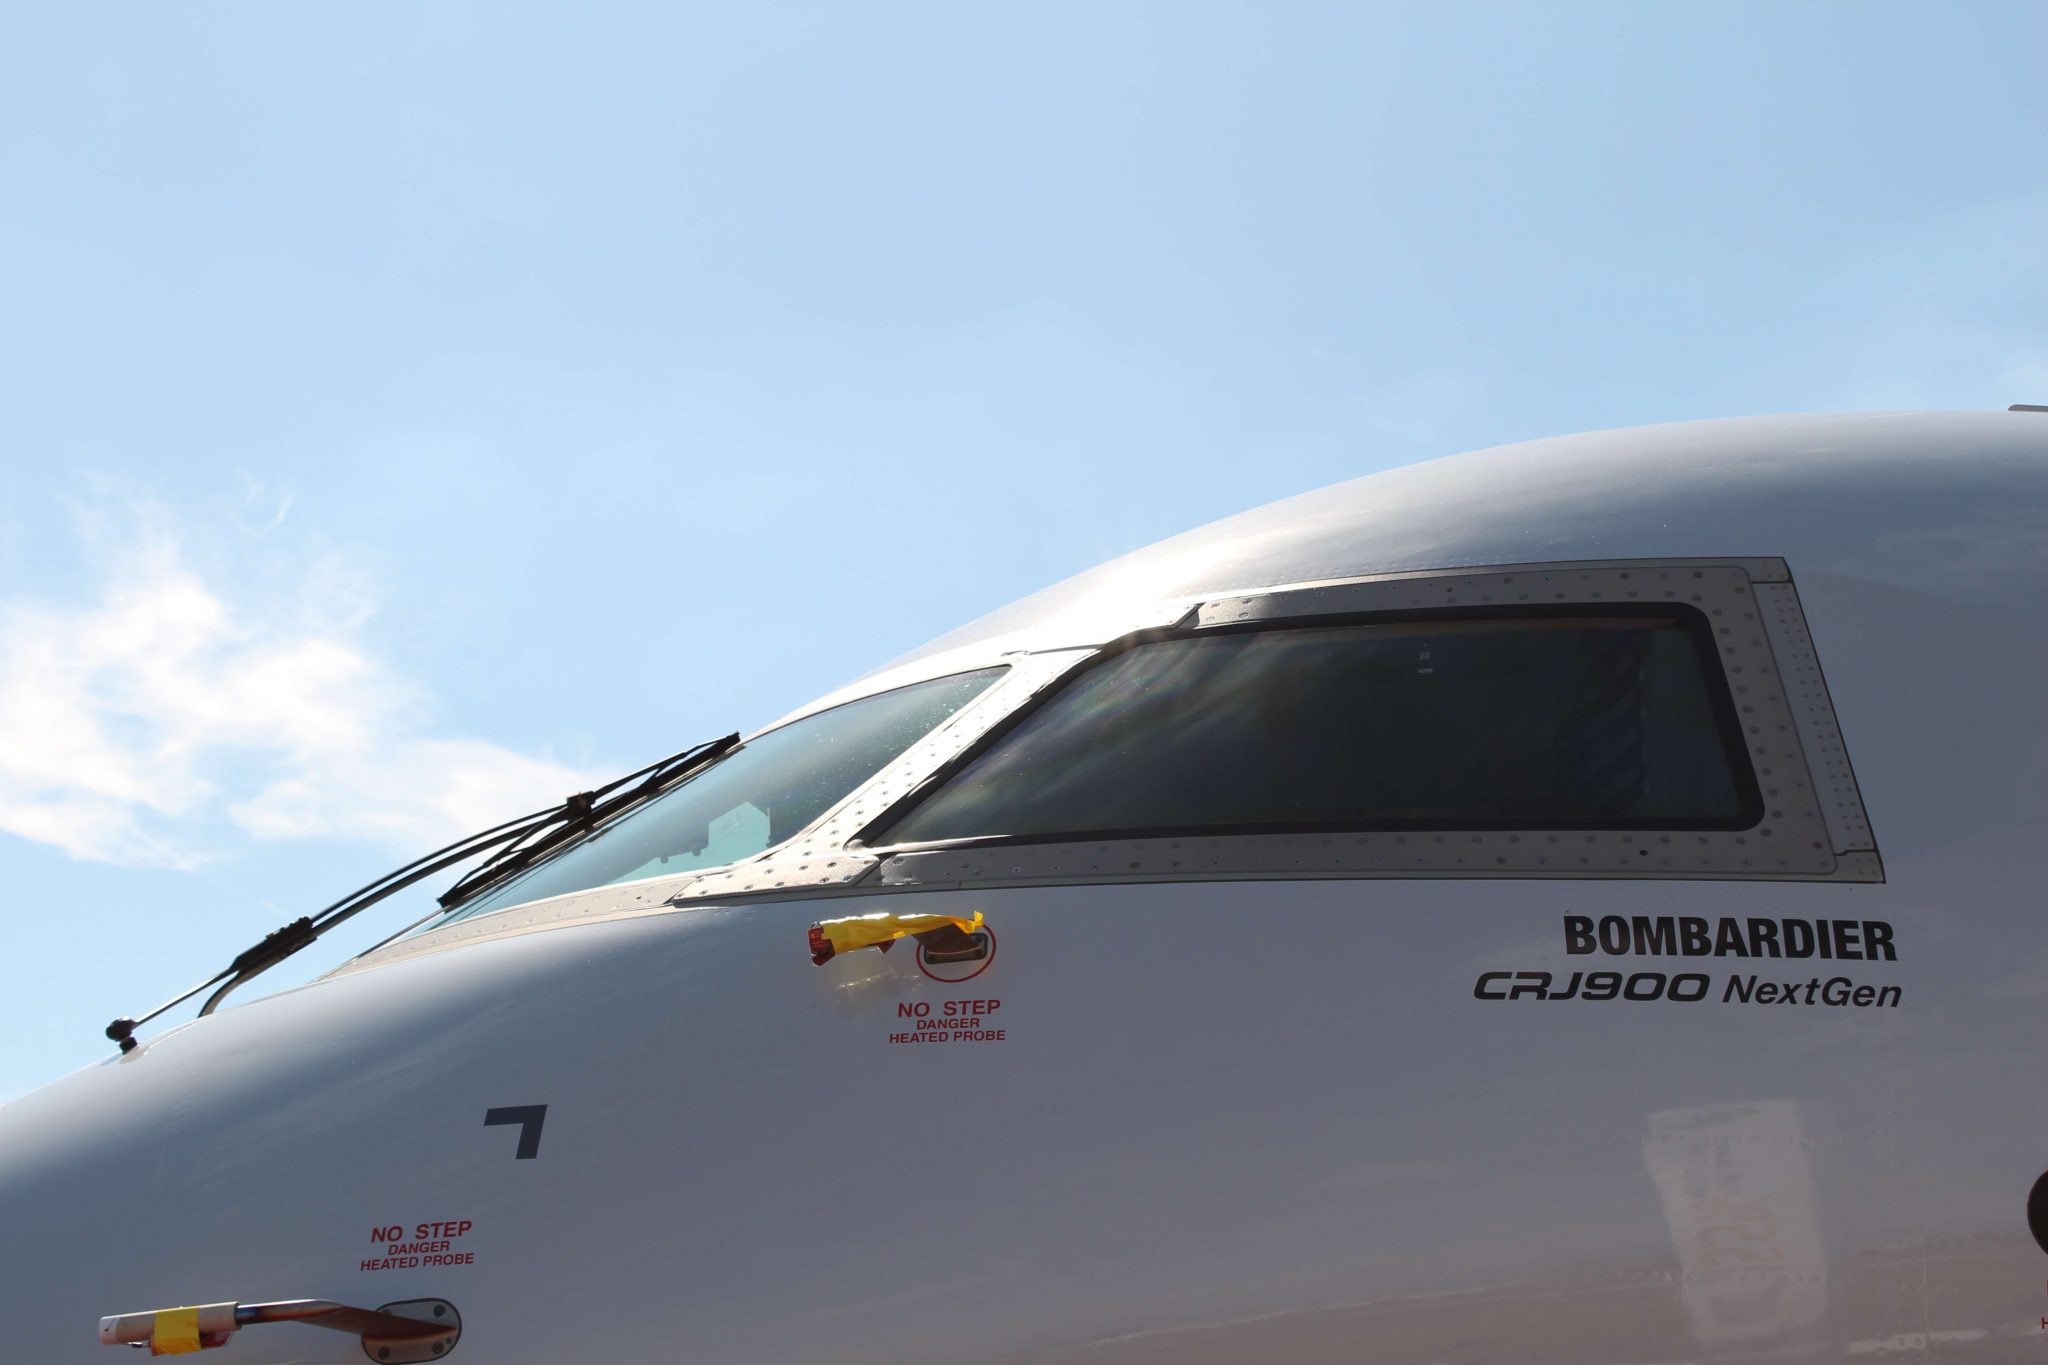 Bombardier expands engine maintenance offering, adds leasing options for select global aircraft customers